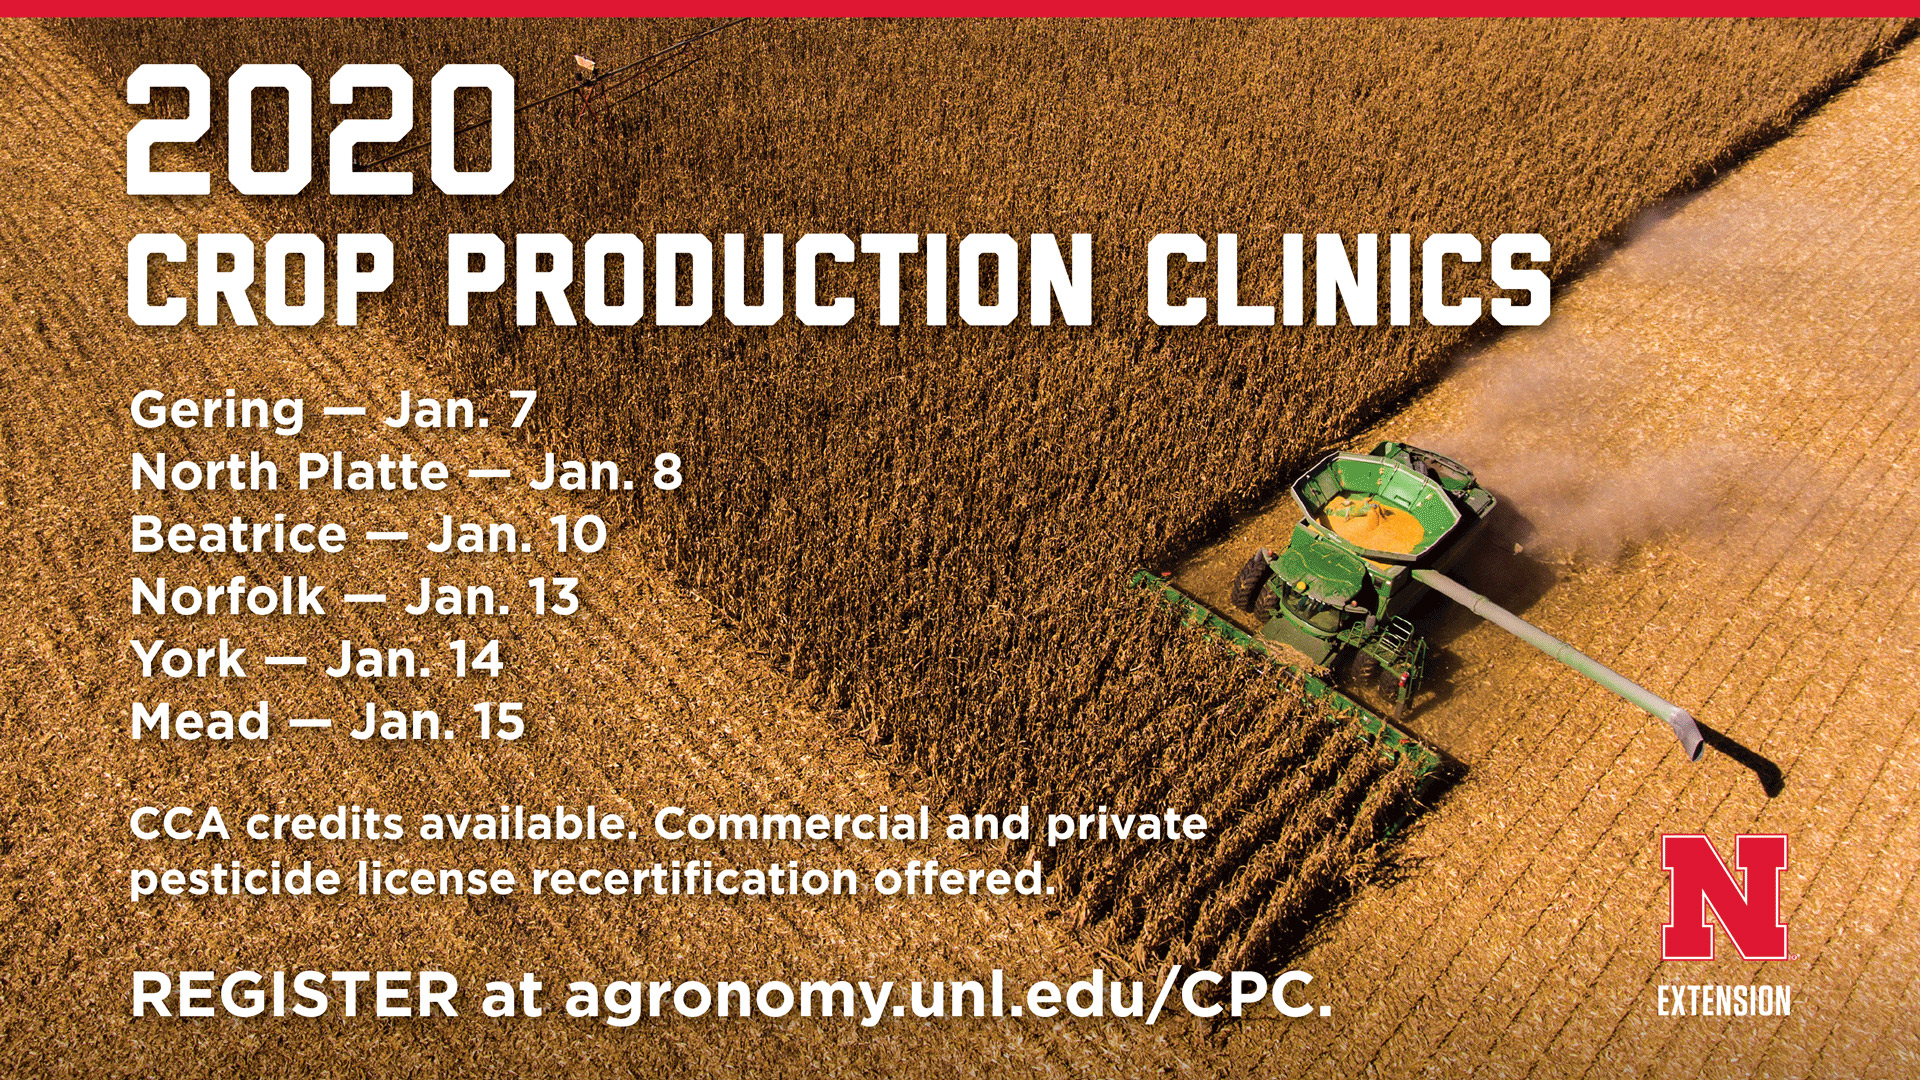 Extension Crop Production Clinics set for January